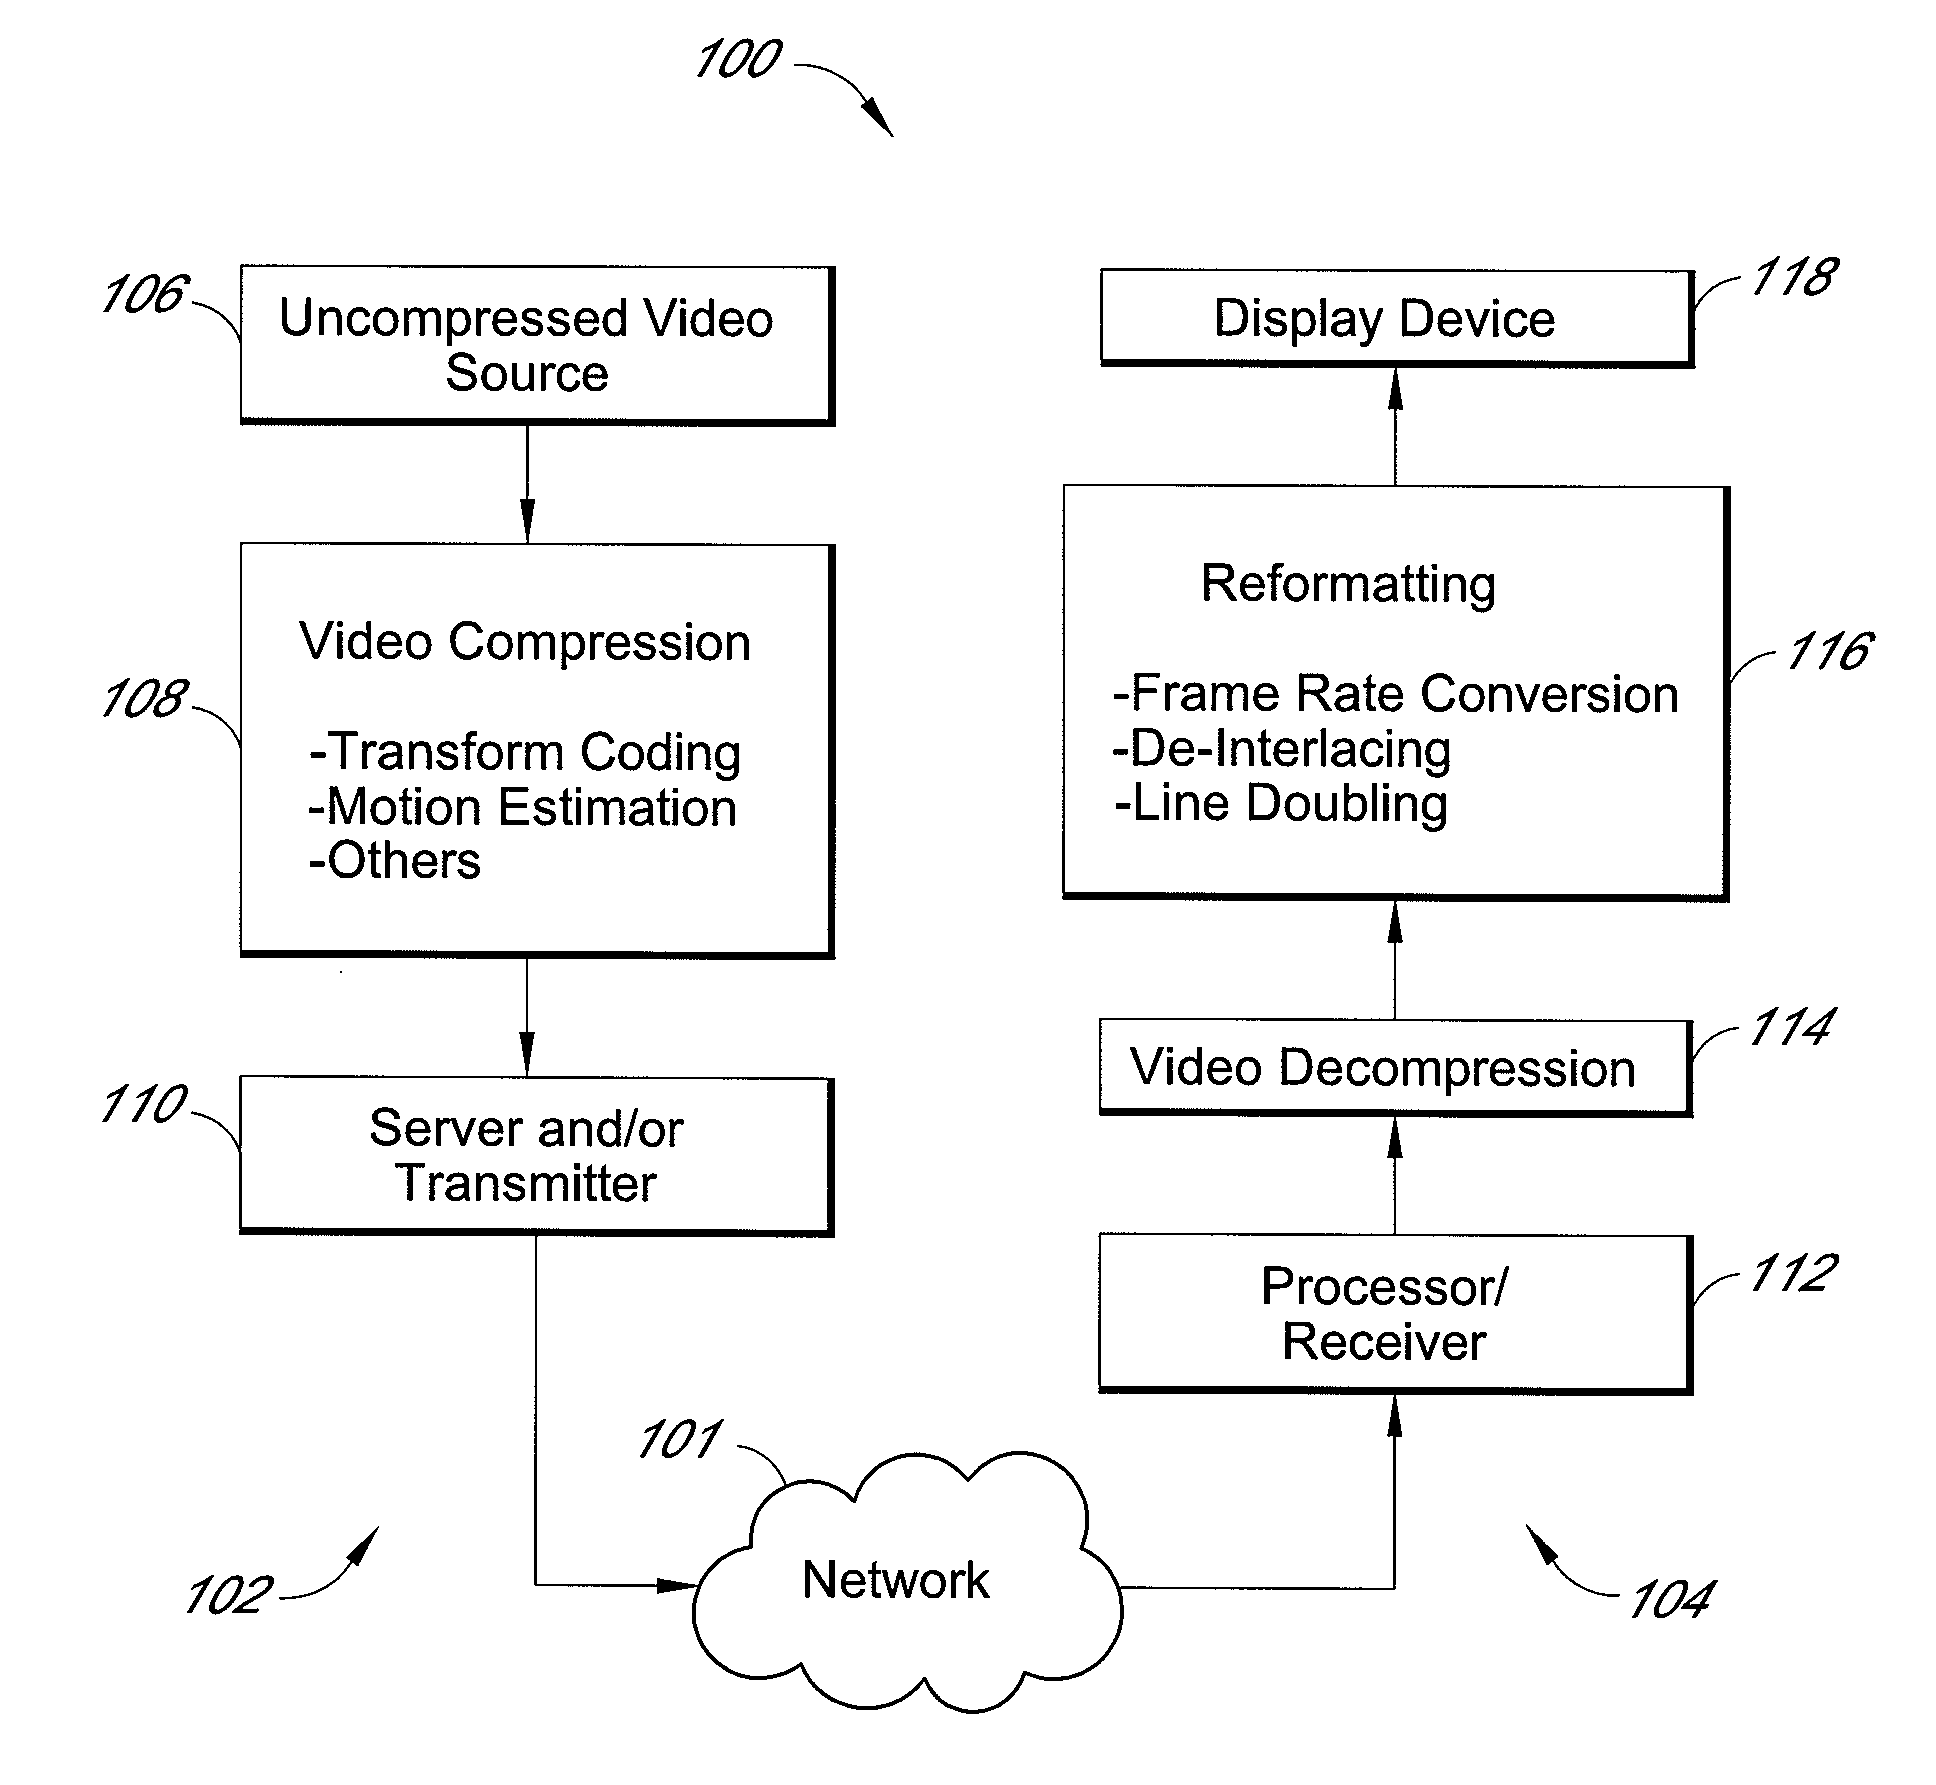 System and method for phase adaptive occlusion detection based on motion vector field in digital video